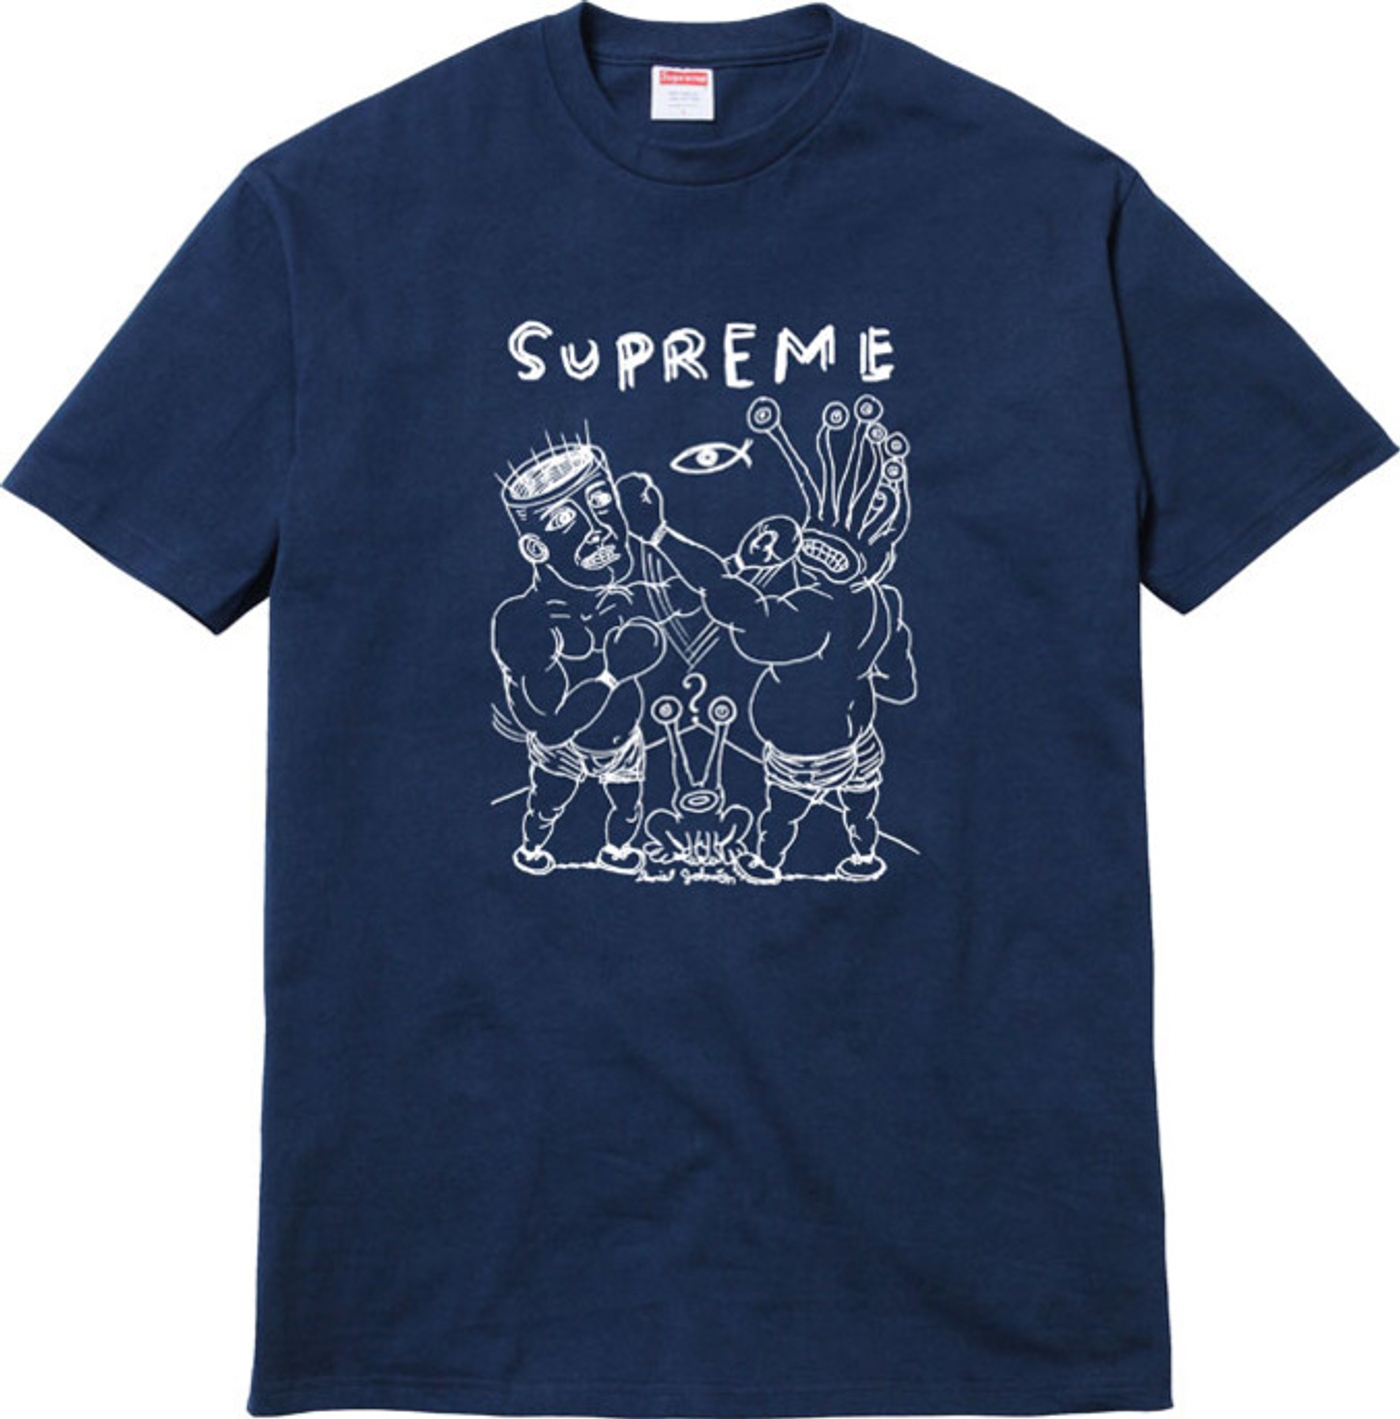 Eternal Fight Tee 
All cotton classic Supreme t-shirt (3/9)